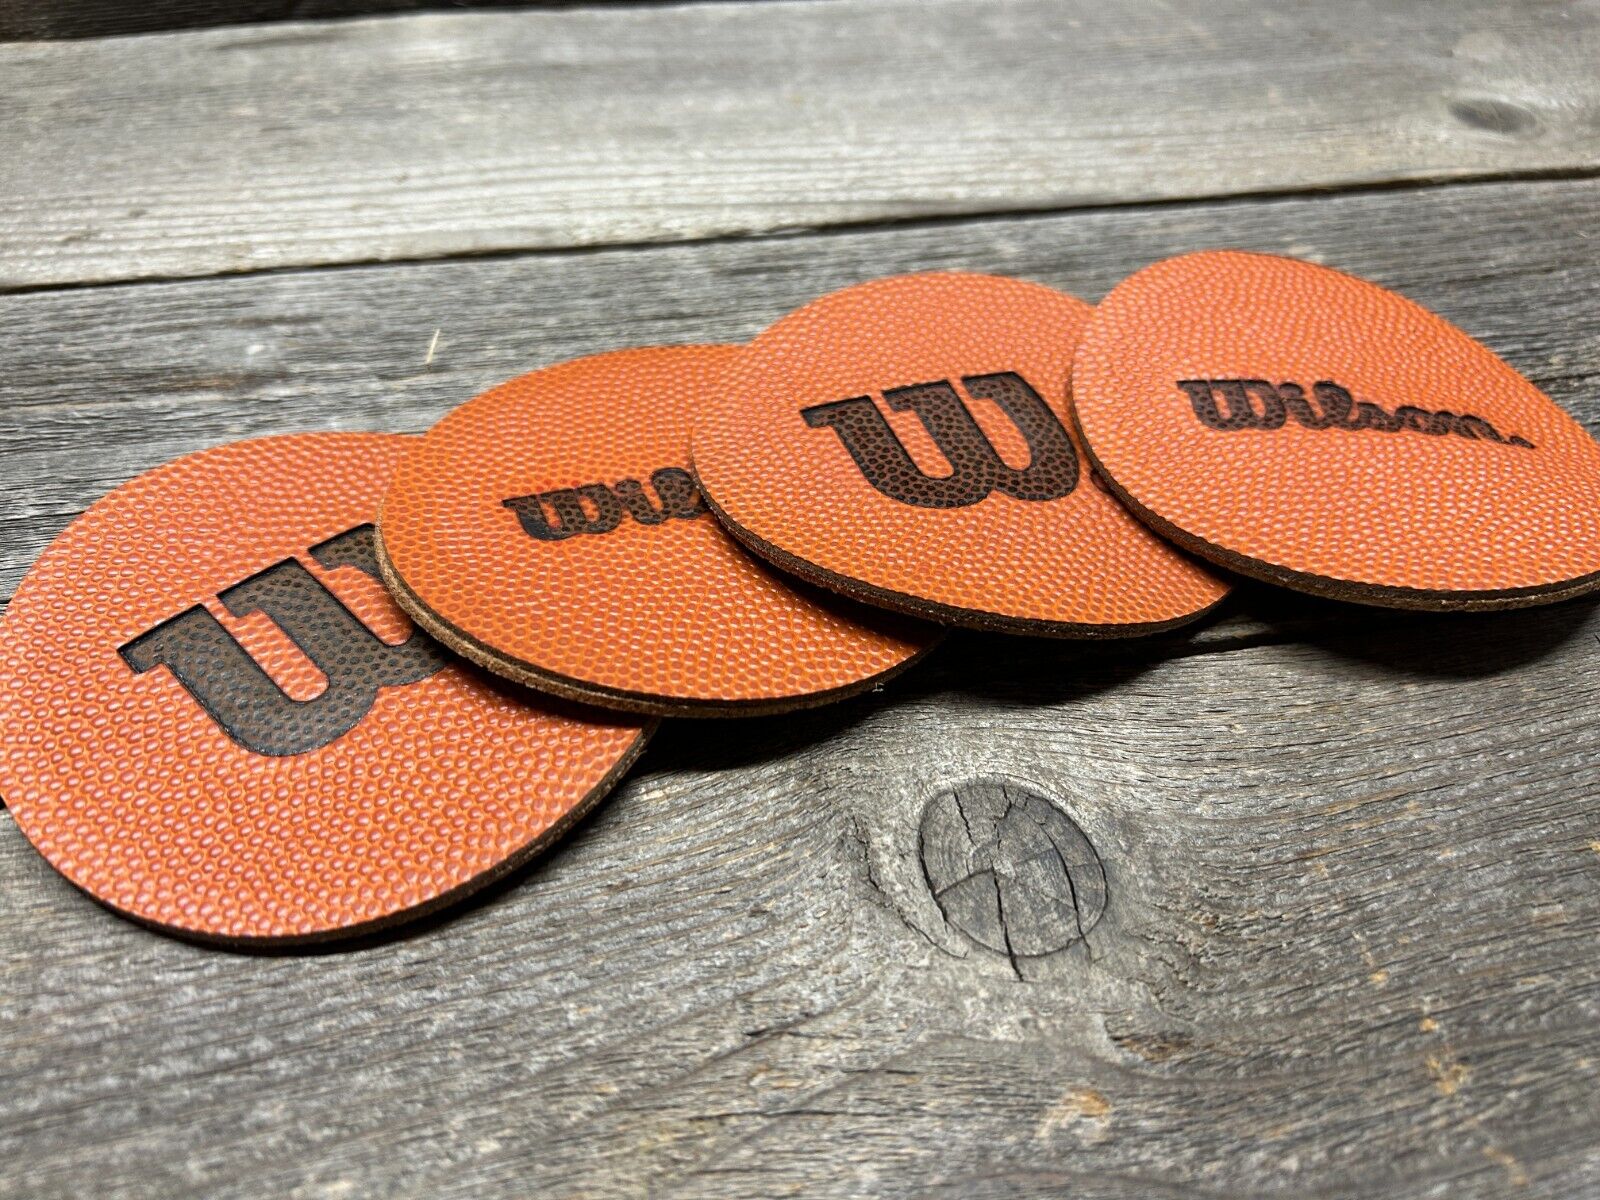 Set of 4 Coasters - WILSON/Horween NBA Leather - Official NBA Basketball Leather